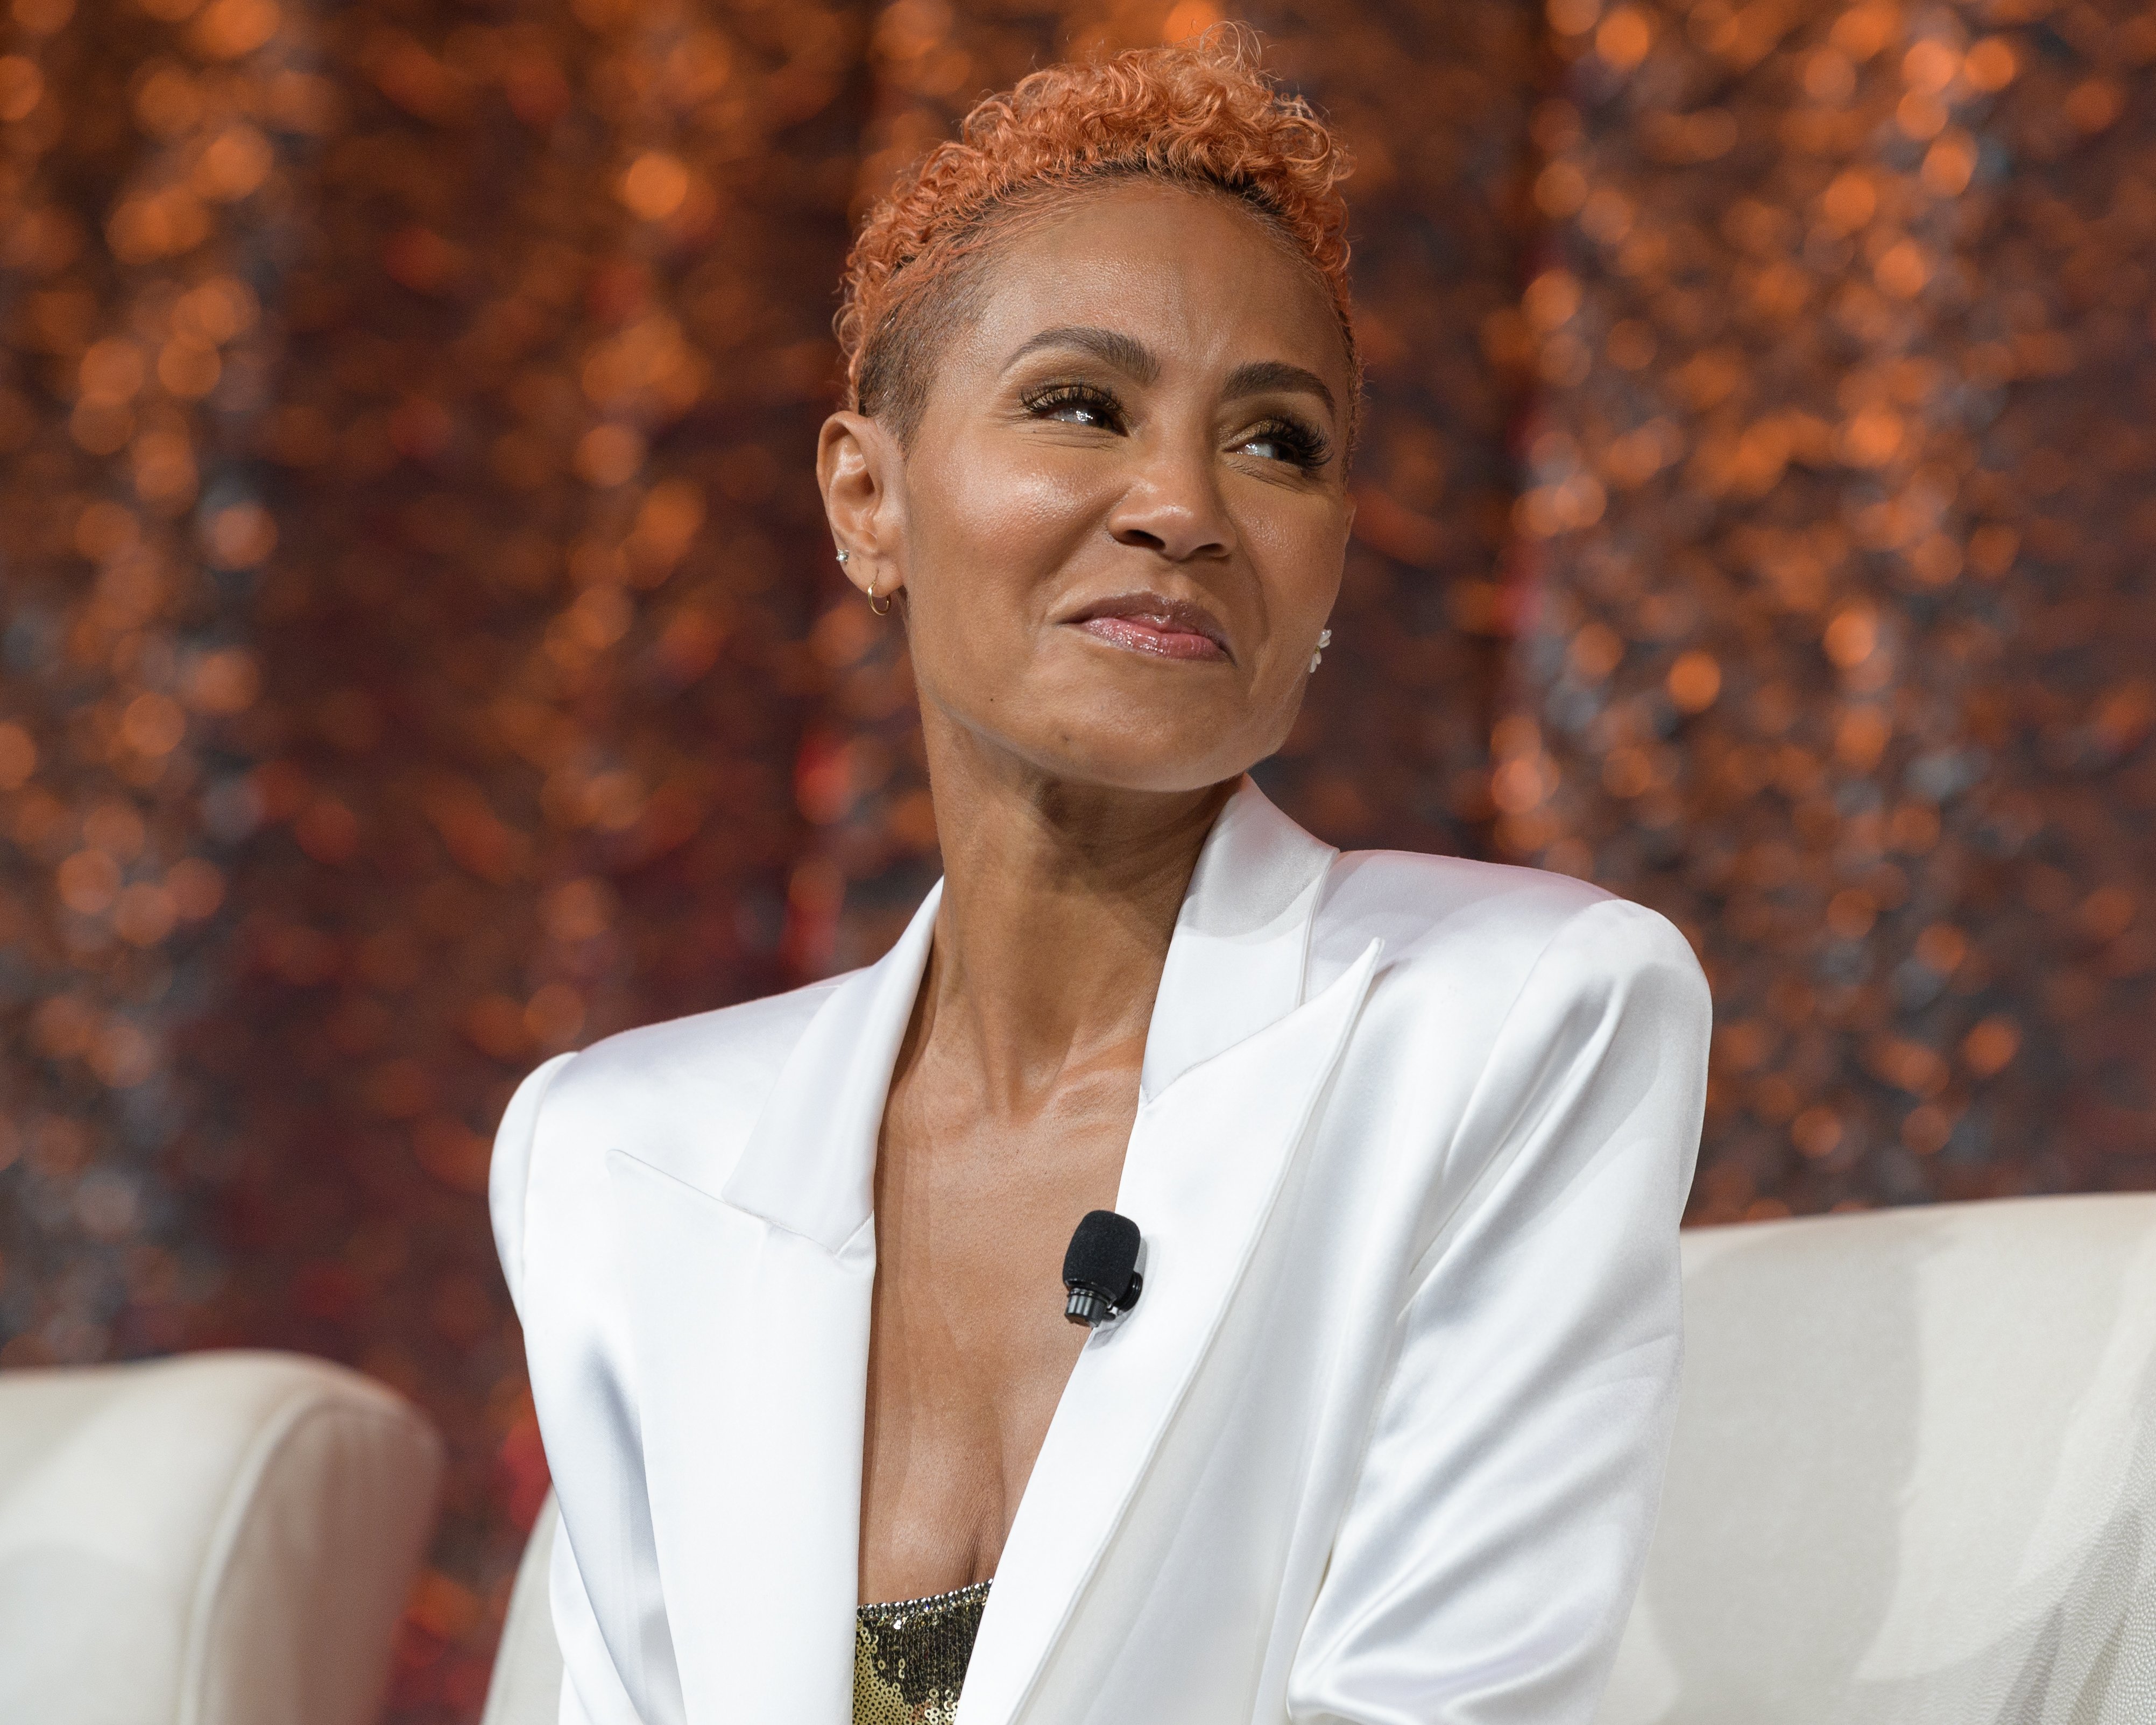 Jada Pinkett Smith during the NATPE Miami 2020 - Facebook on January 22, 2020 in Miami Beach, Florida | Photo: Getty Images